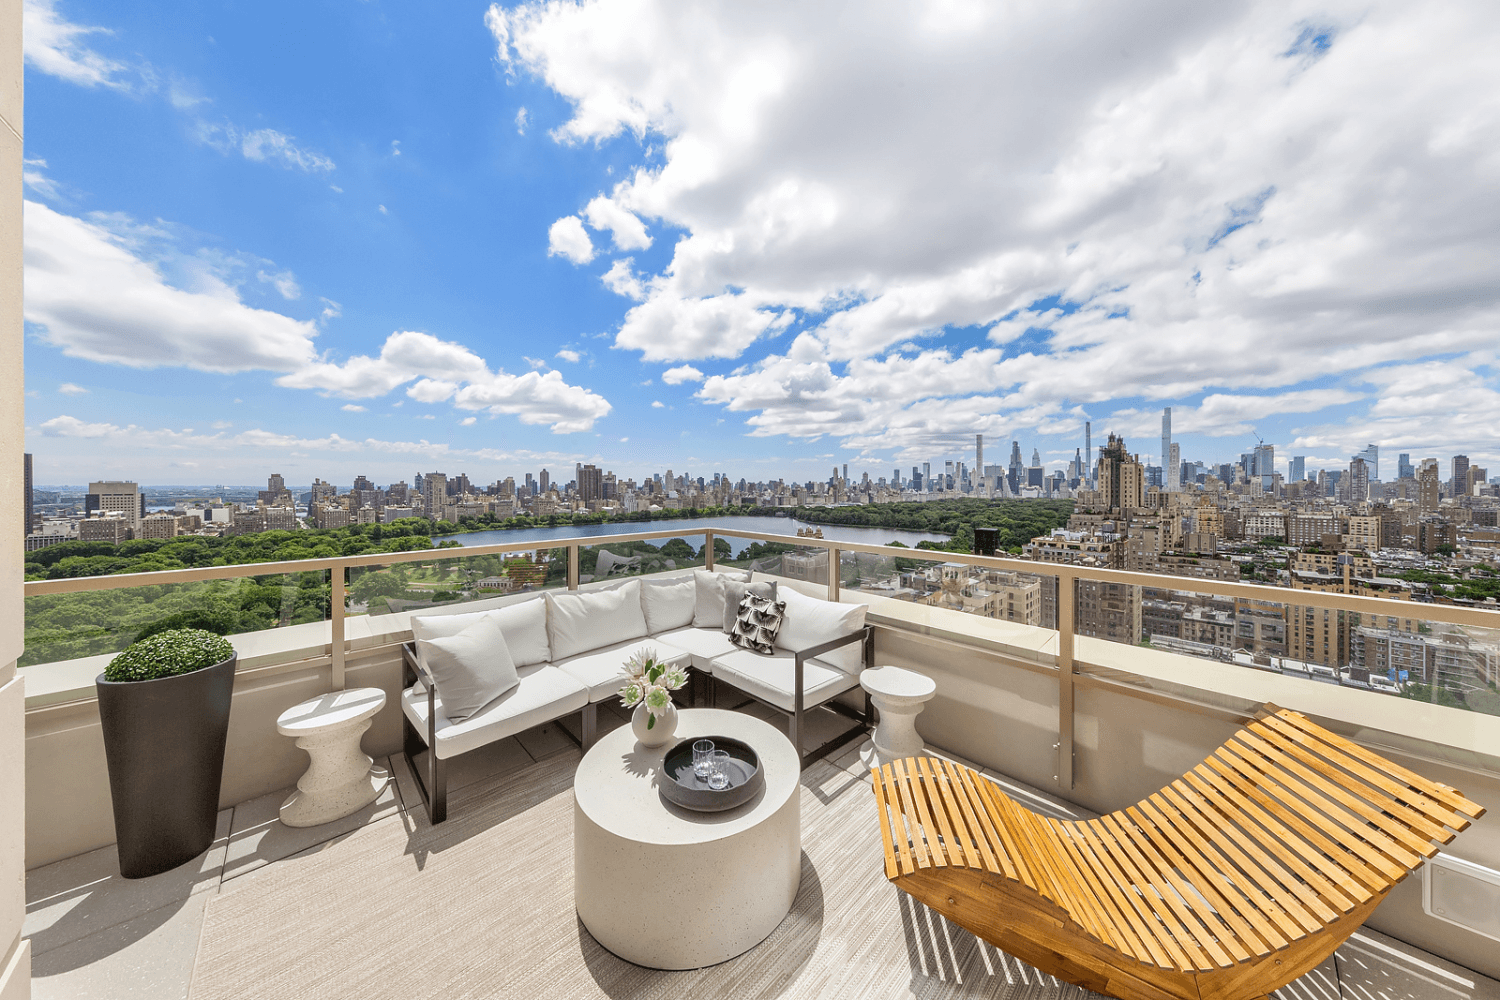 Your Upper West Side Story Begins Here at Fifteen Off The ParkIMMEDIATE OCCUPANCYFor a Limited Time, Offering 4 to Buyer's Brokers !